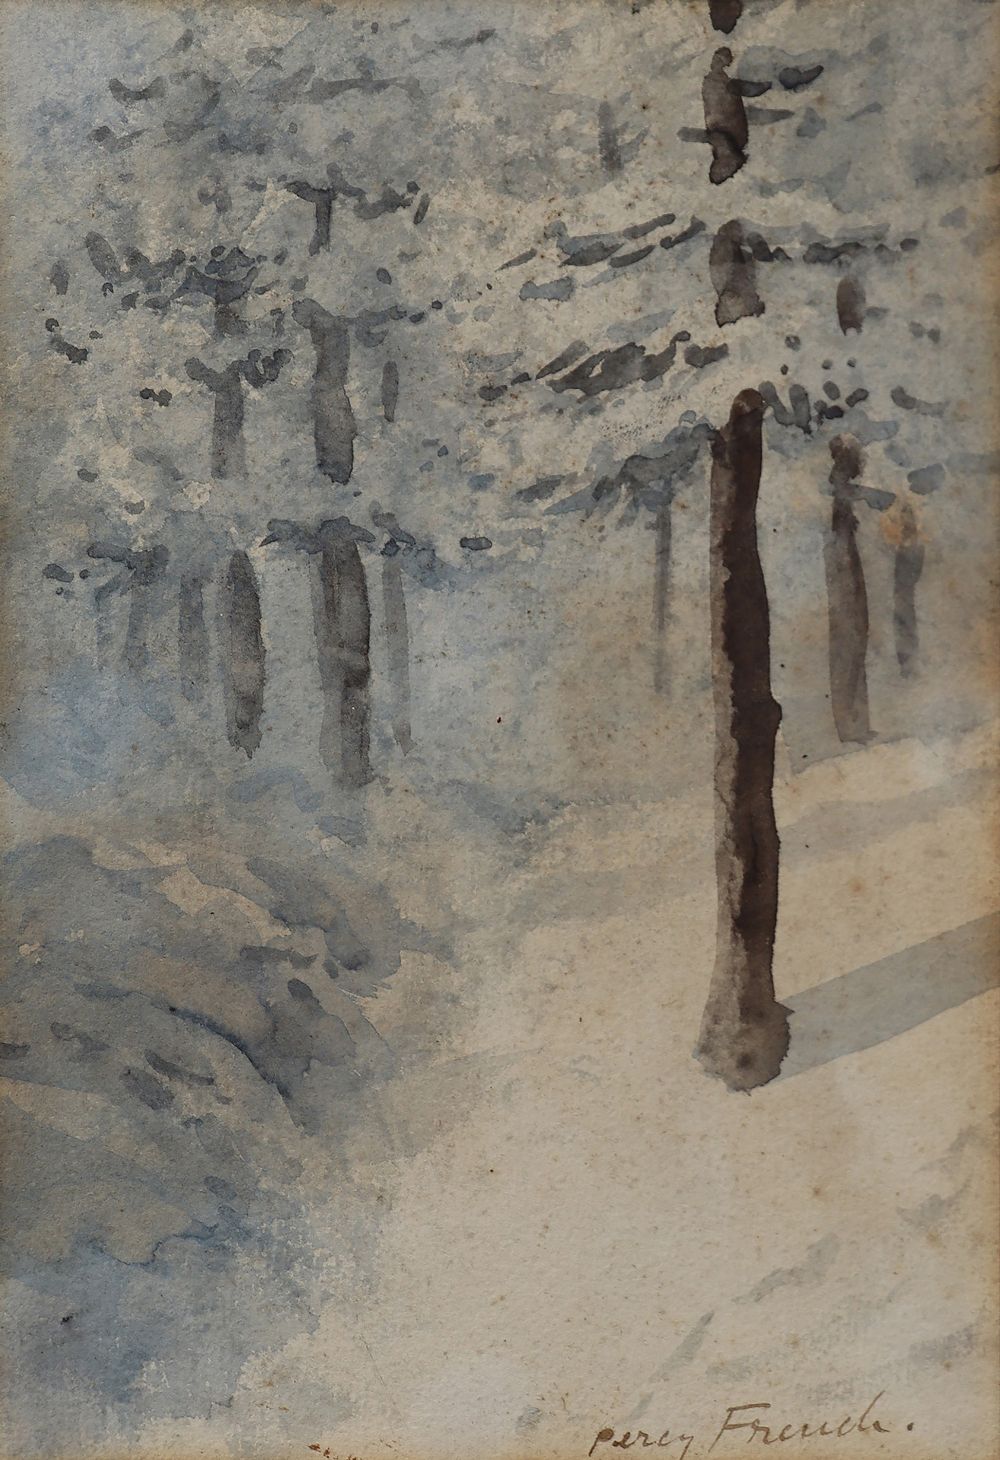 Lot 6 - FOREST PATH AFTER SNOW by William Percy French